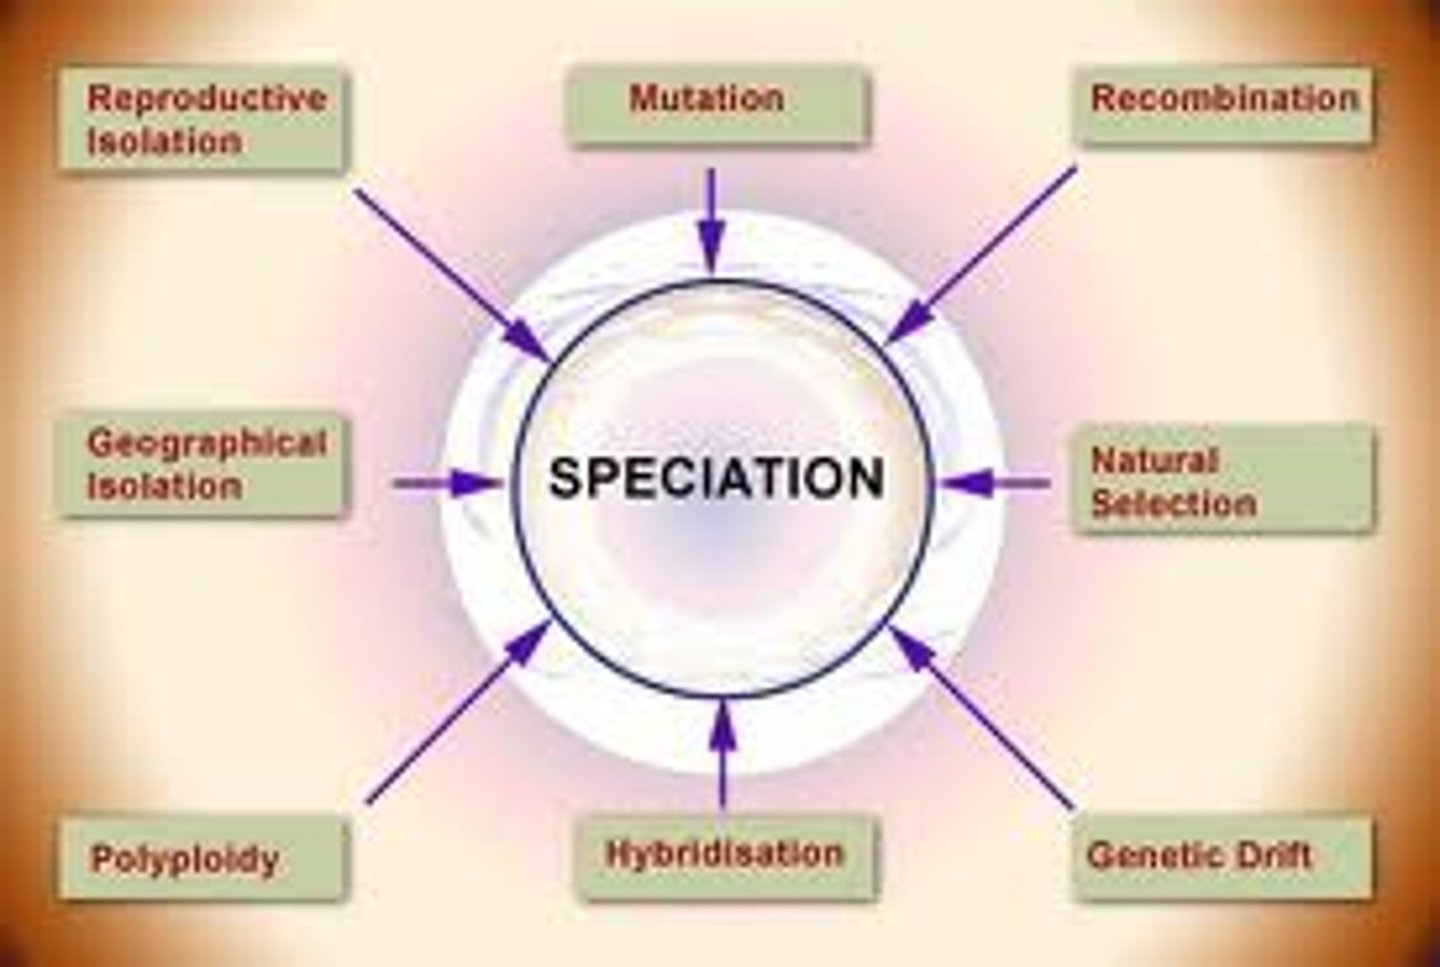 <p>formation of new species as a result of geographic or reproductive isolation.</p>